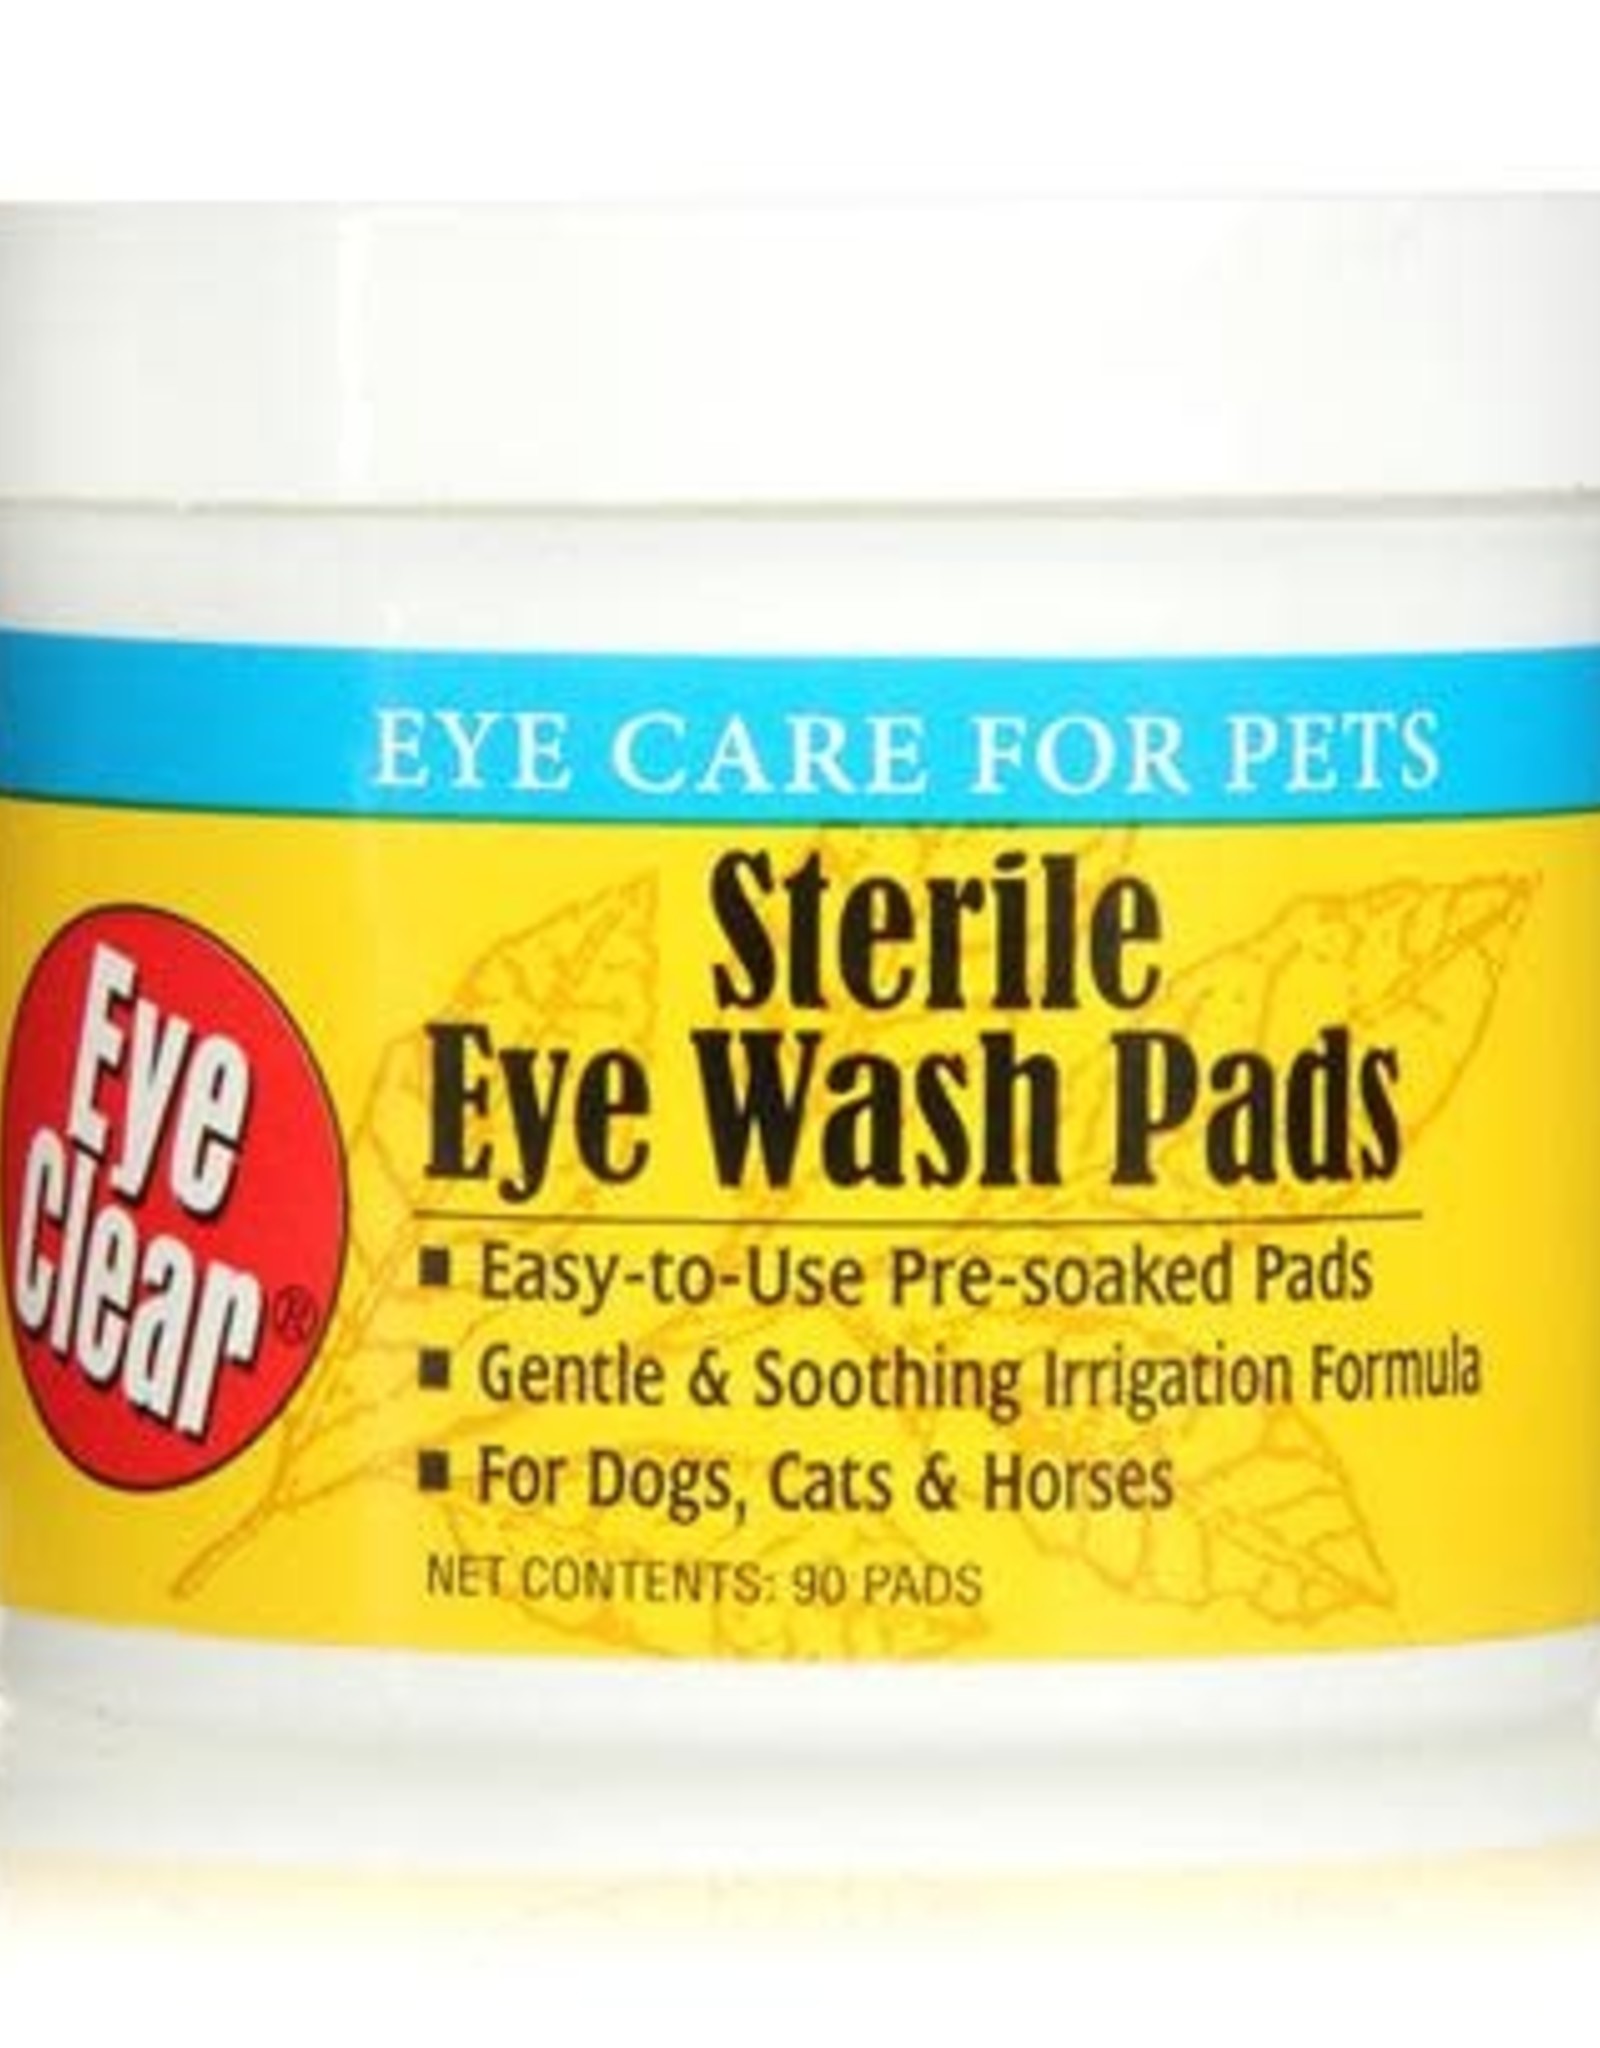 Miracle Care Sterile Eye Wash 4OZ